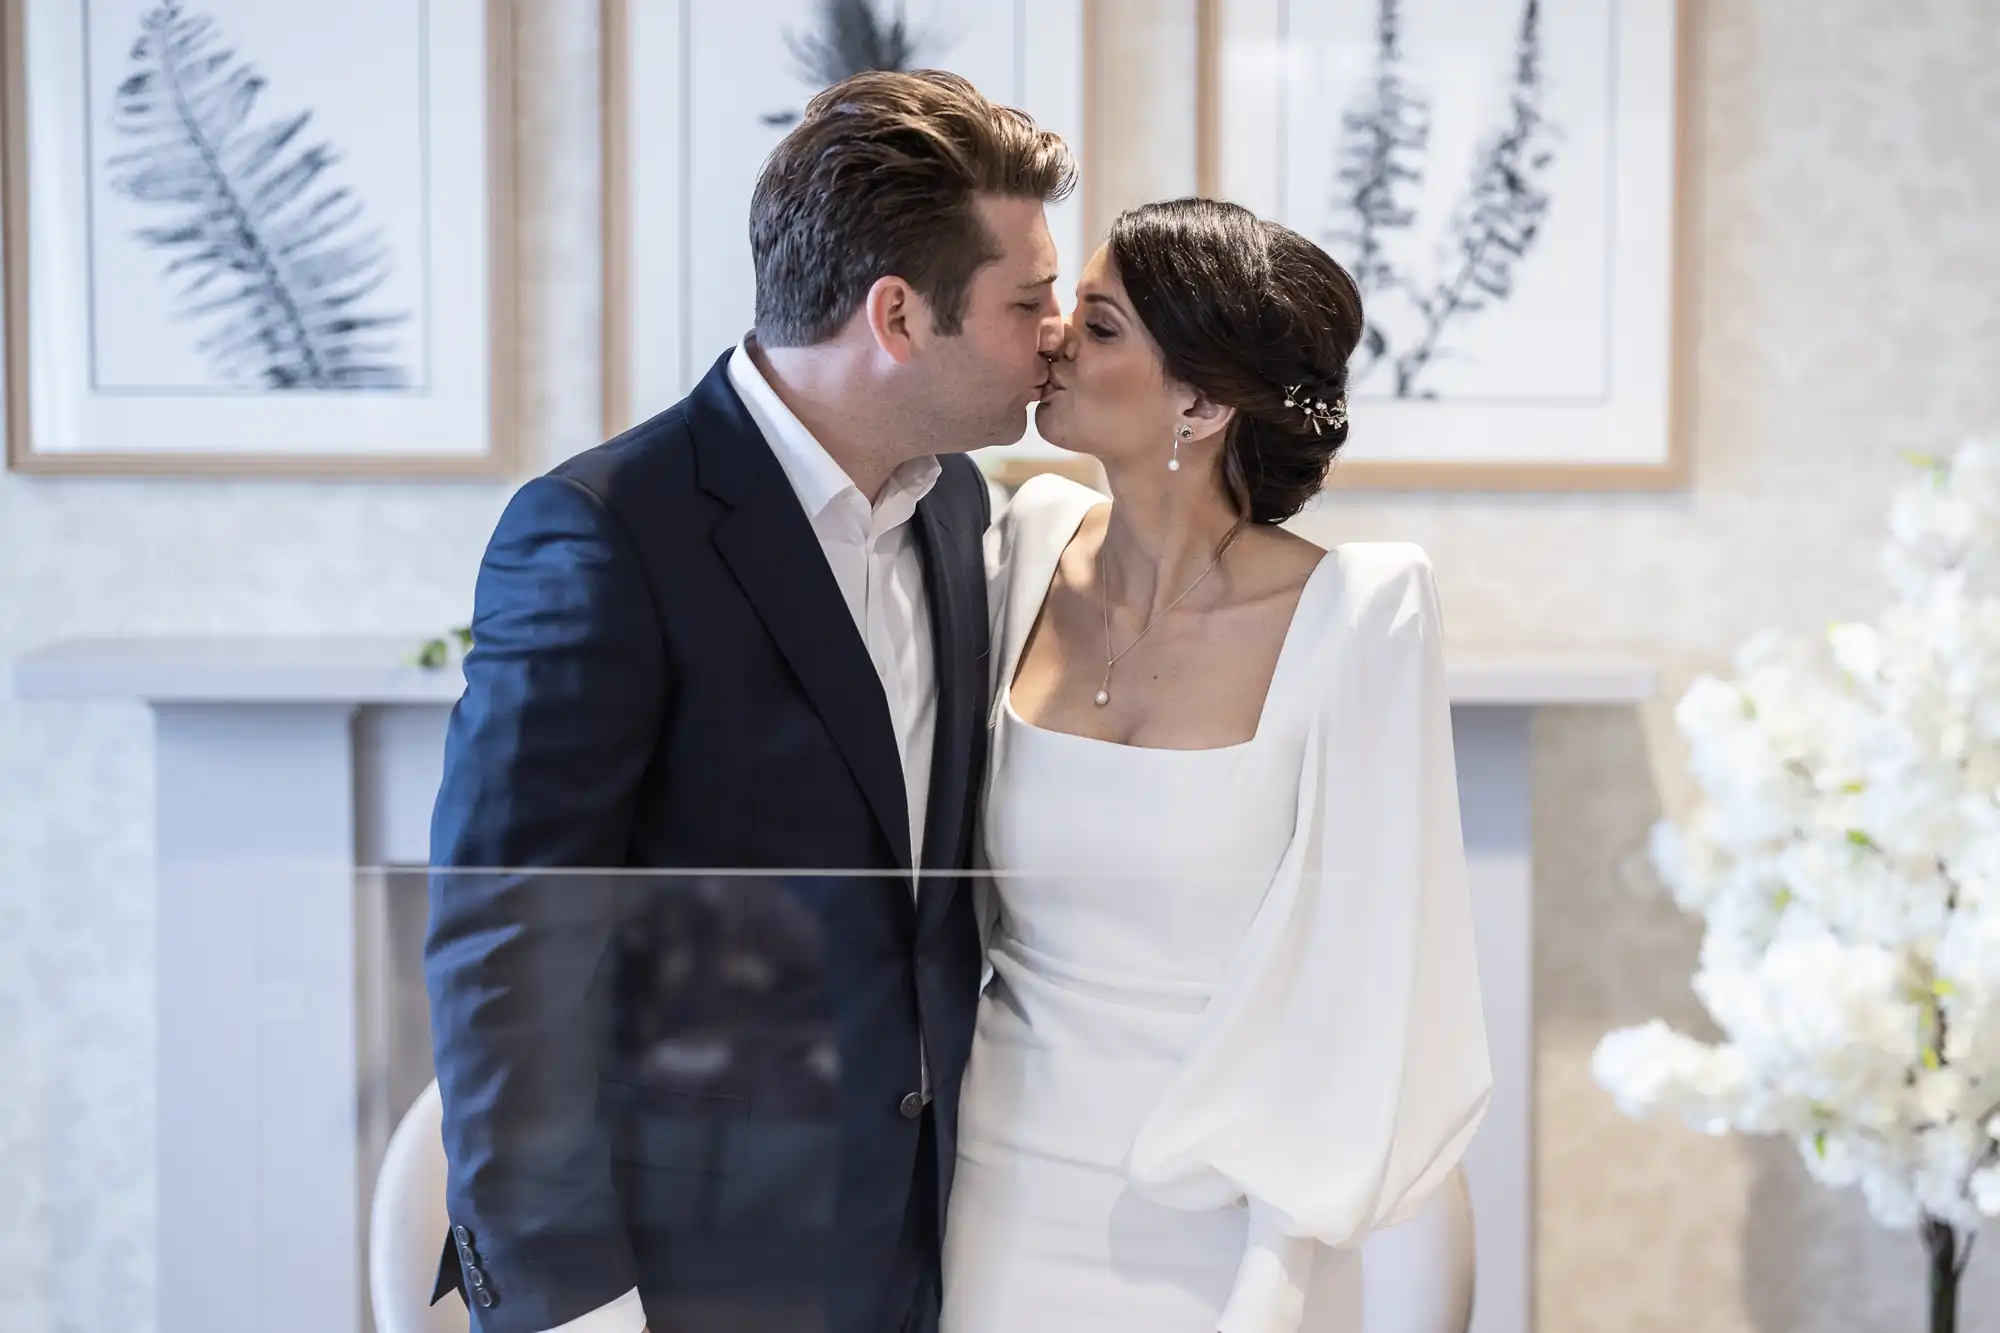 A bride in a white gown and a groom in a black suit kiss softly in a well-decorated room with white flowers and elegant art on the walls.